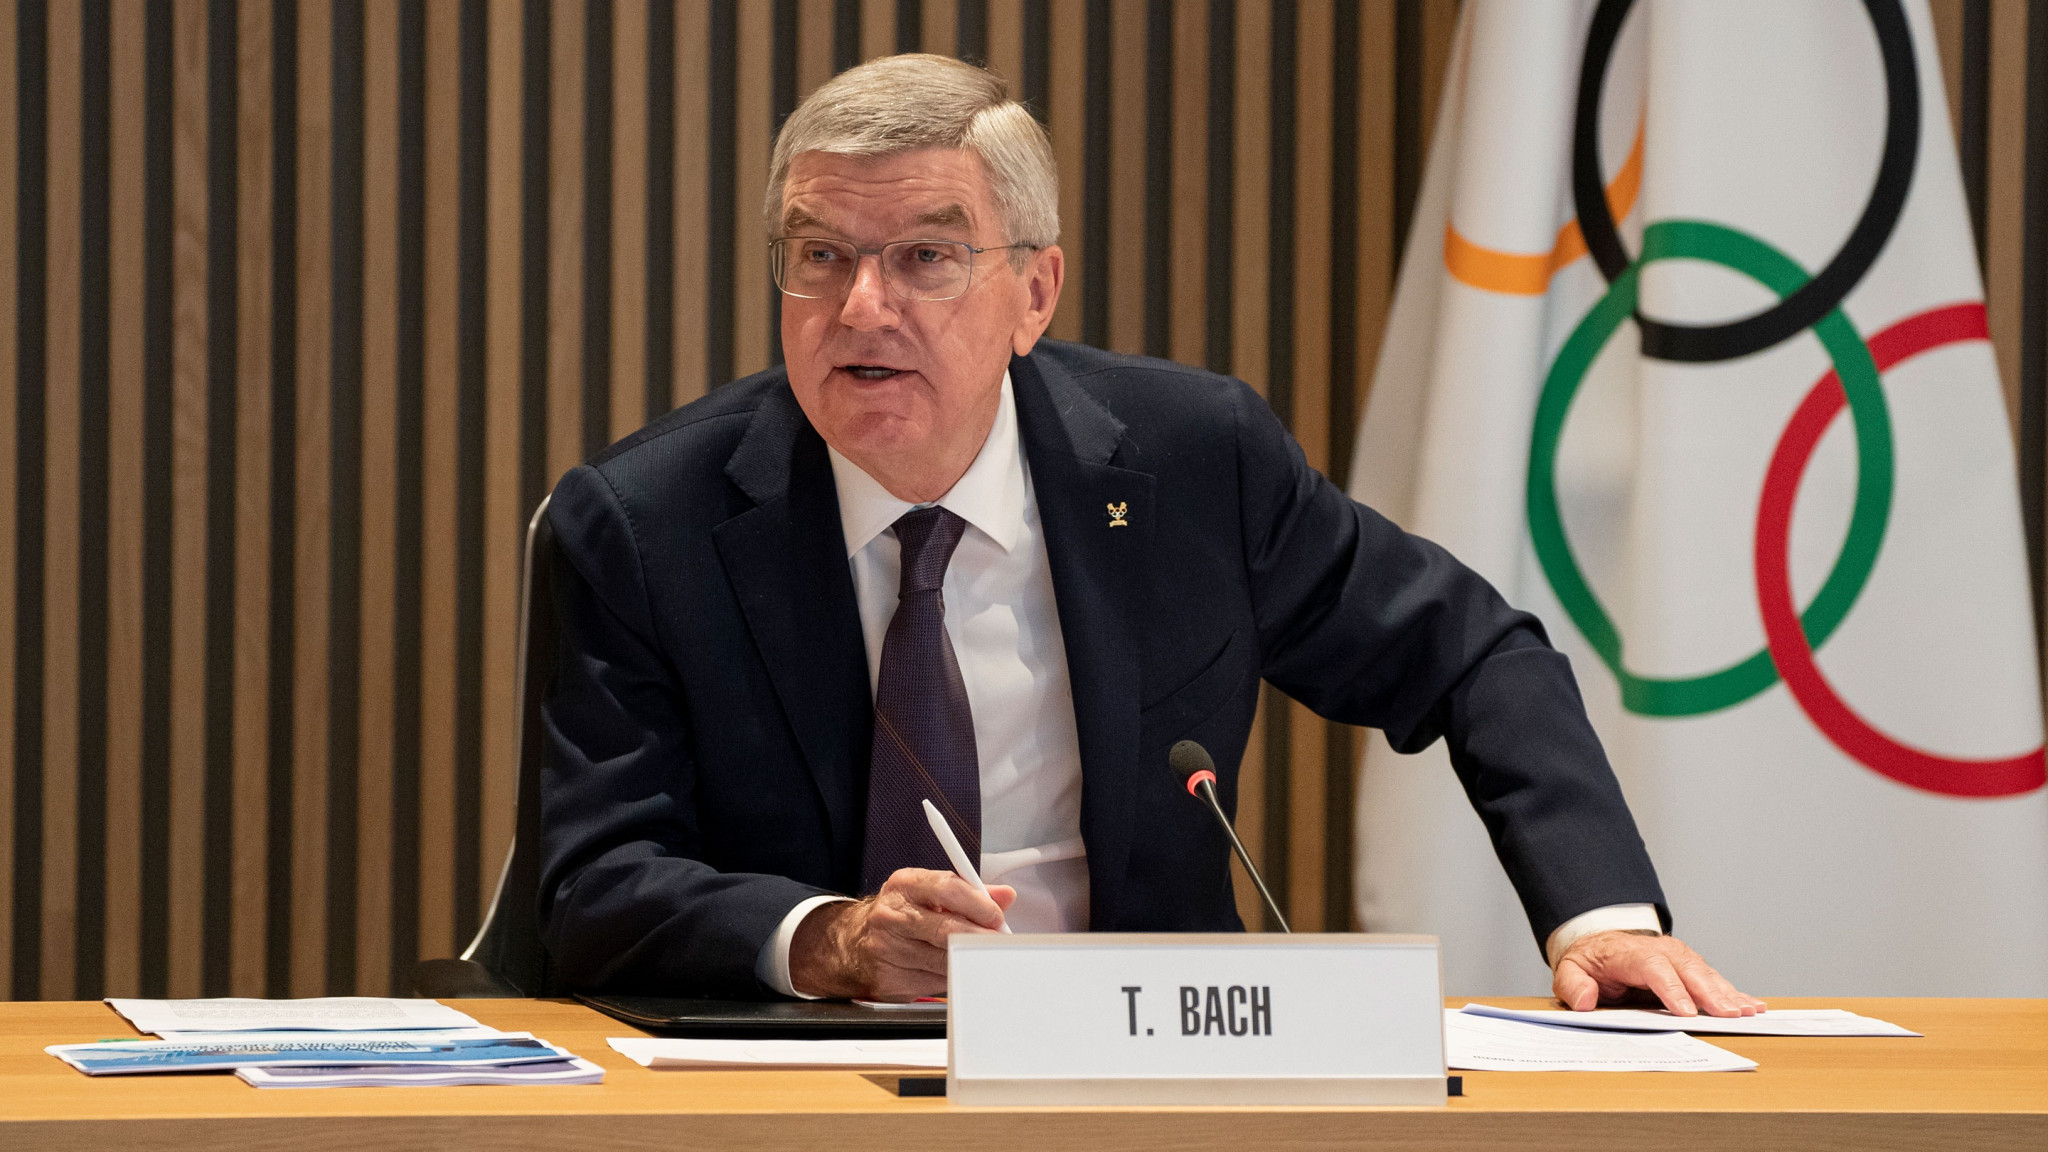 Thomas Bach has offered a contradictory position on allowing athletes from Russia and Belarus to compete following the invasion of Ukraine ©IOC